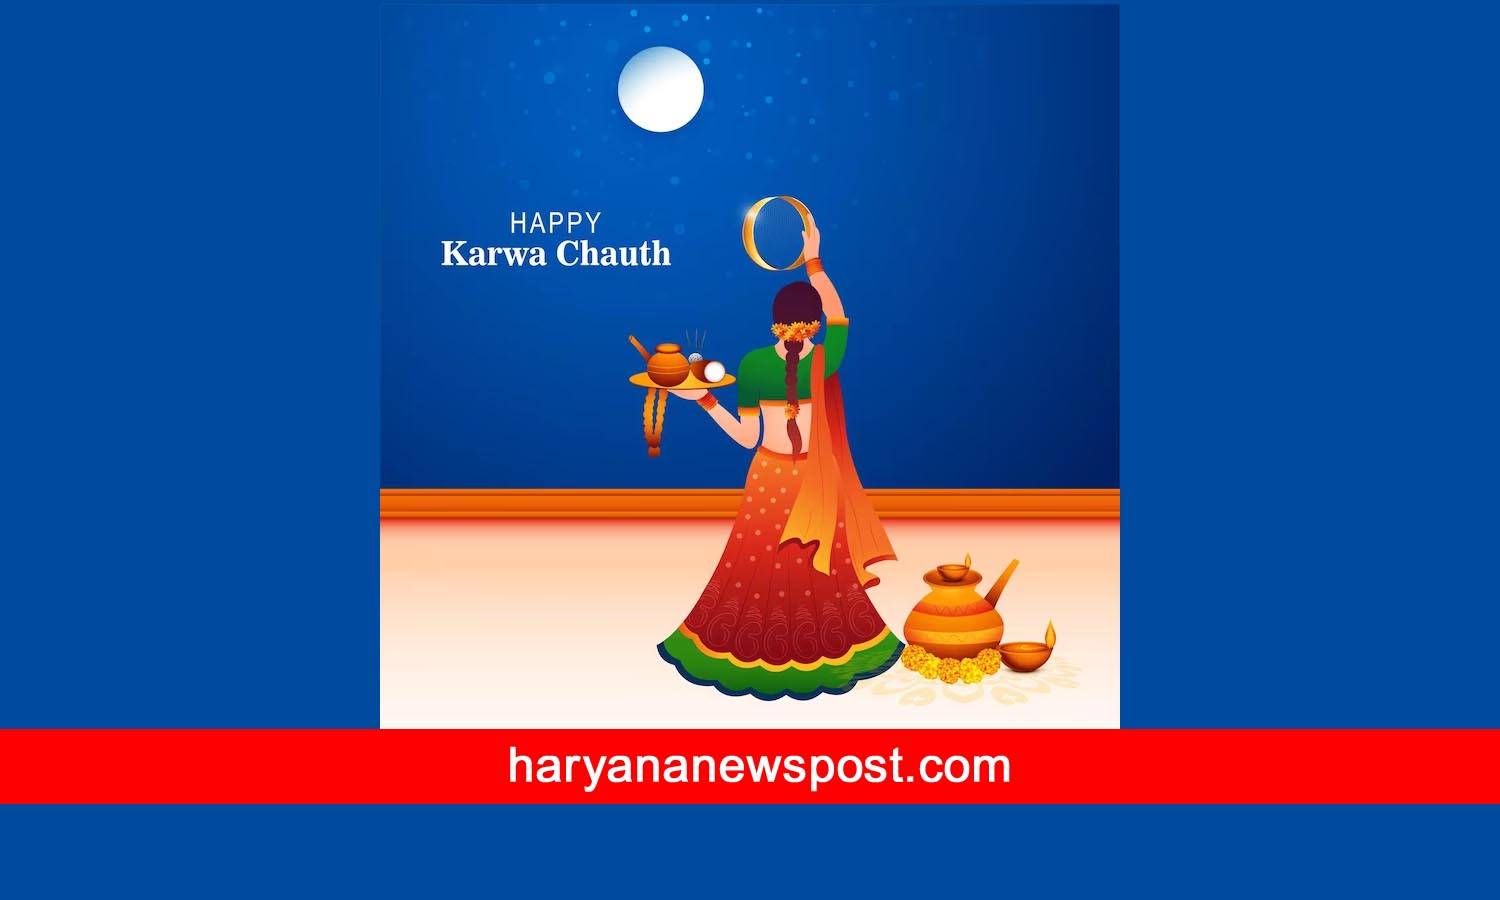 karwa chauth message for friends - karva chauth greeting wishes best friends